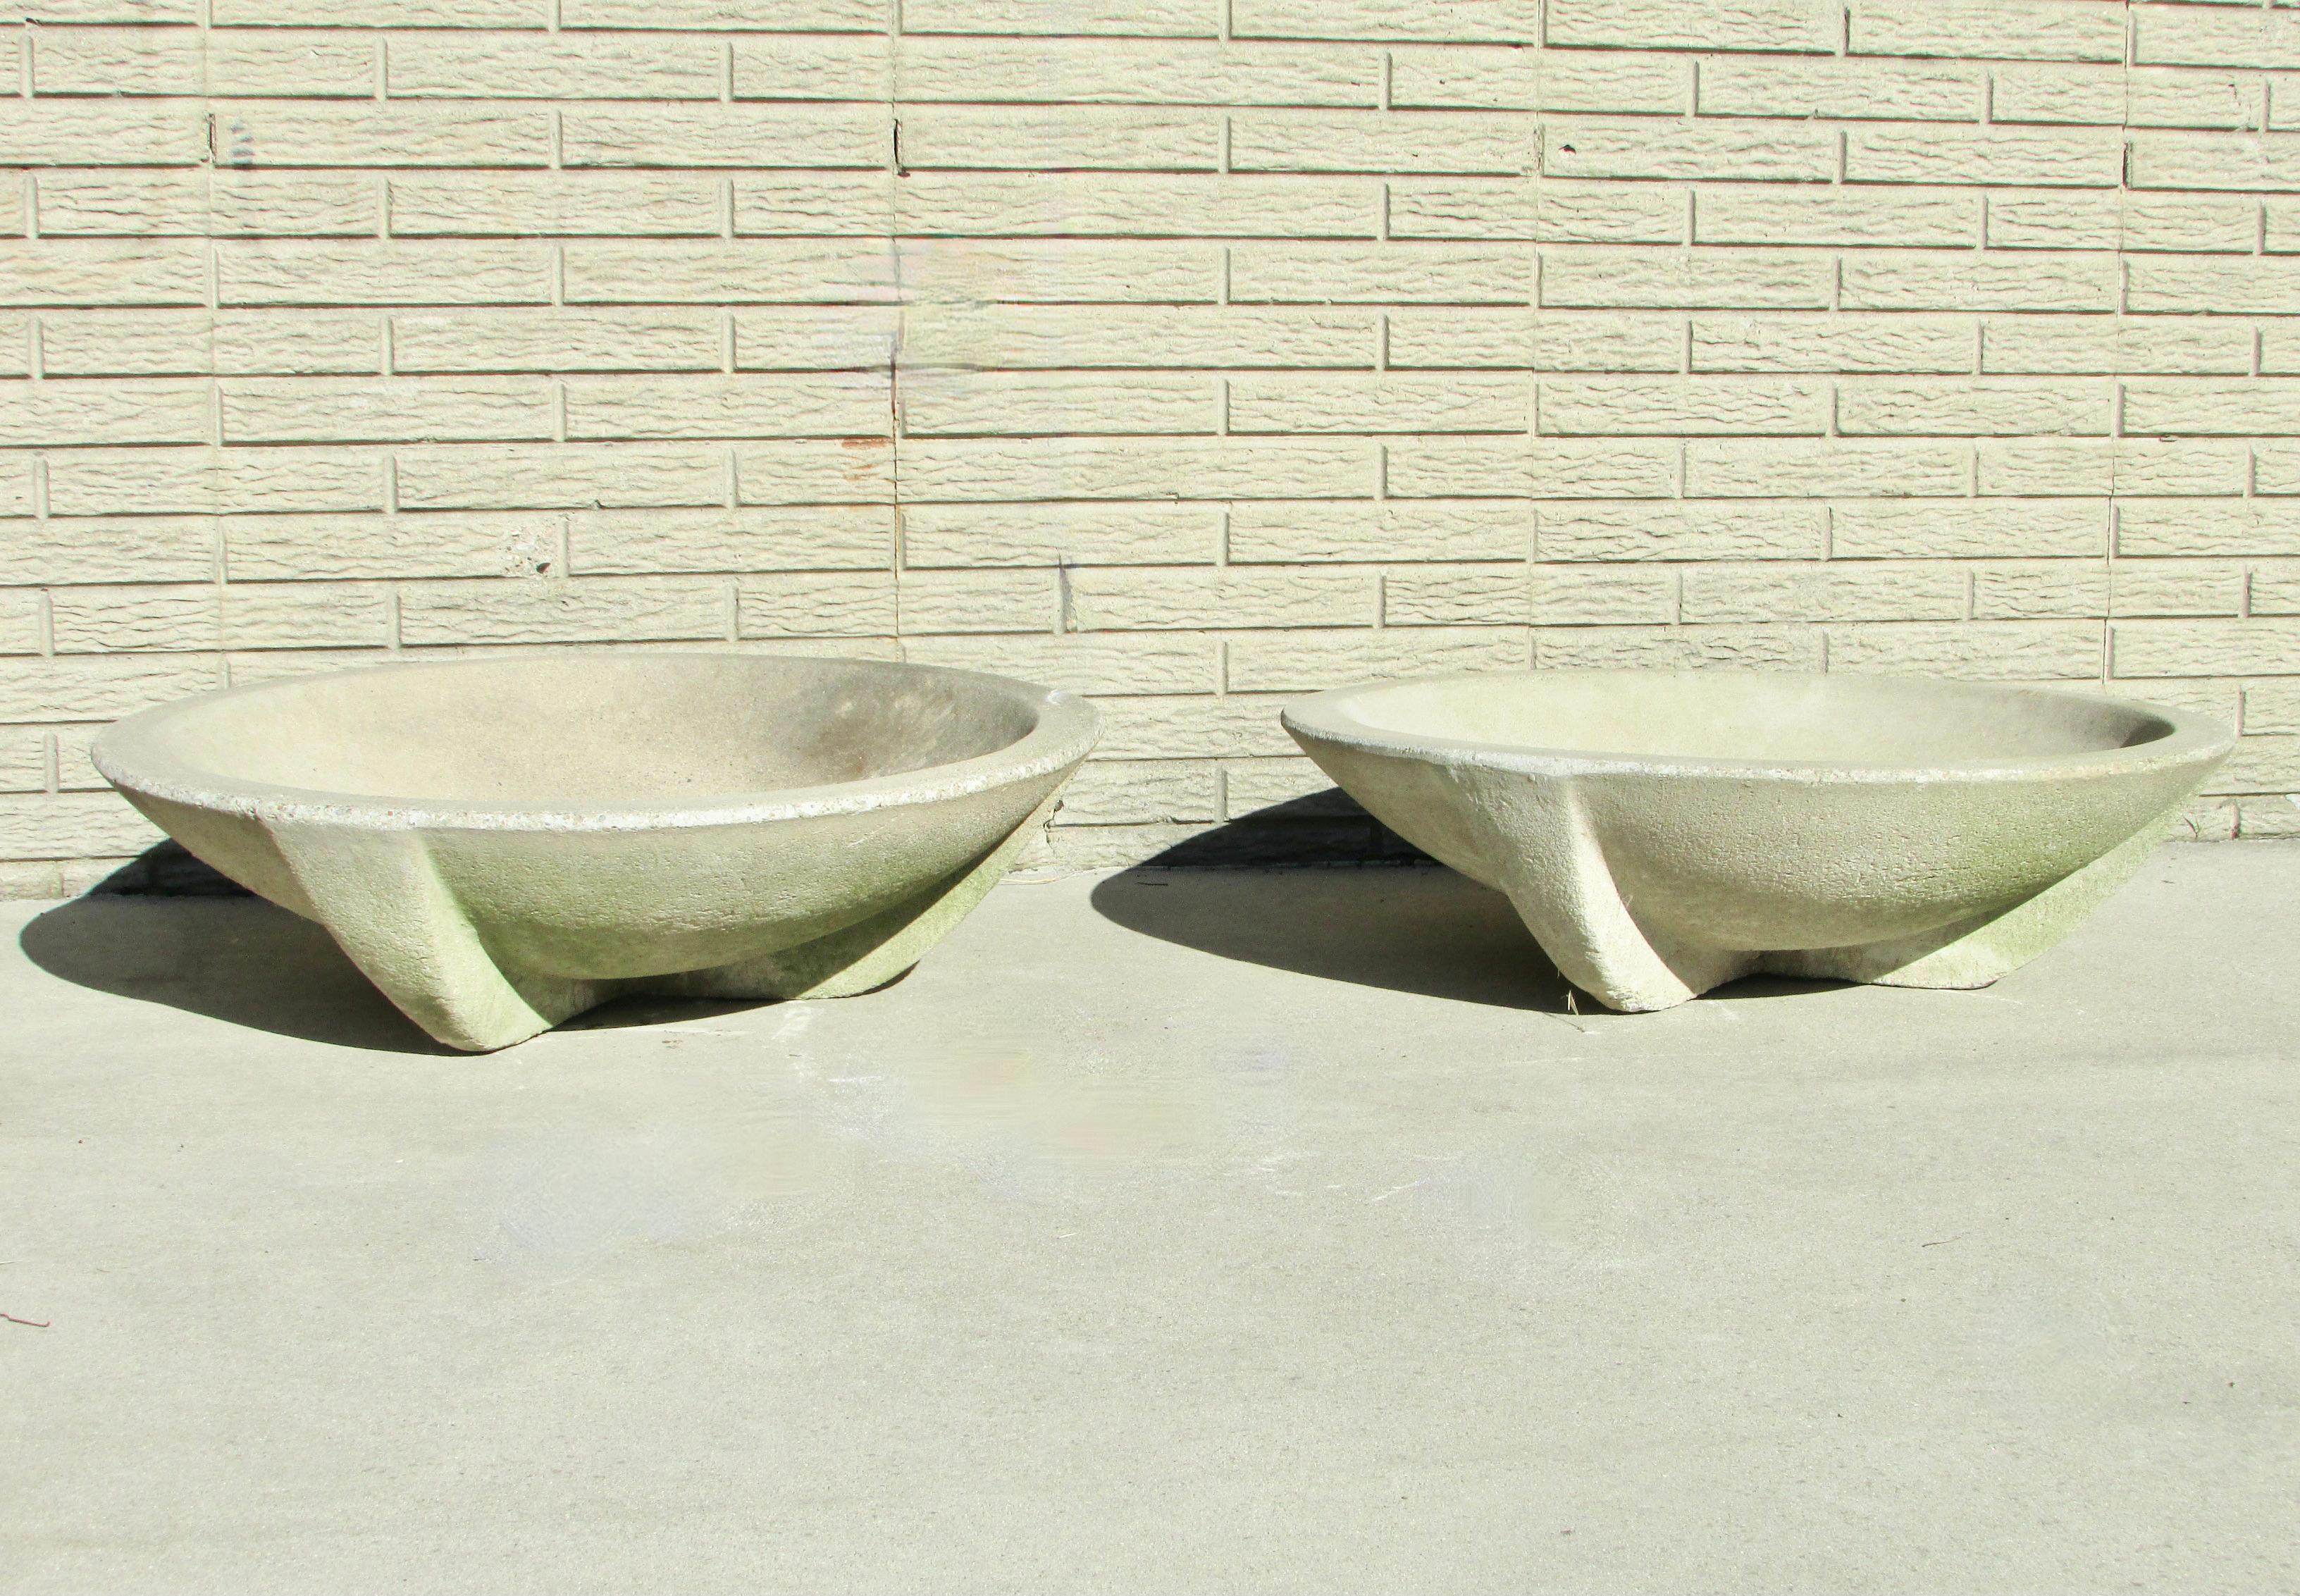 Frank Lloyd Wright Style Arts and Crafts Prairie School Cement Planter Pots For Sale 1